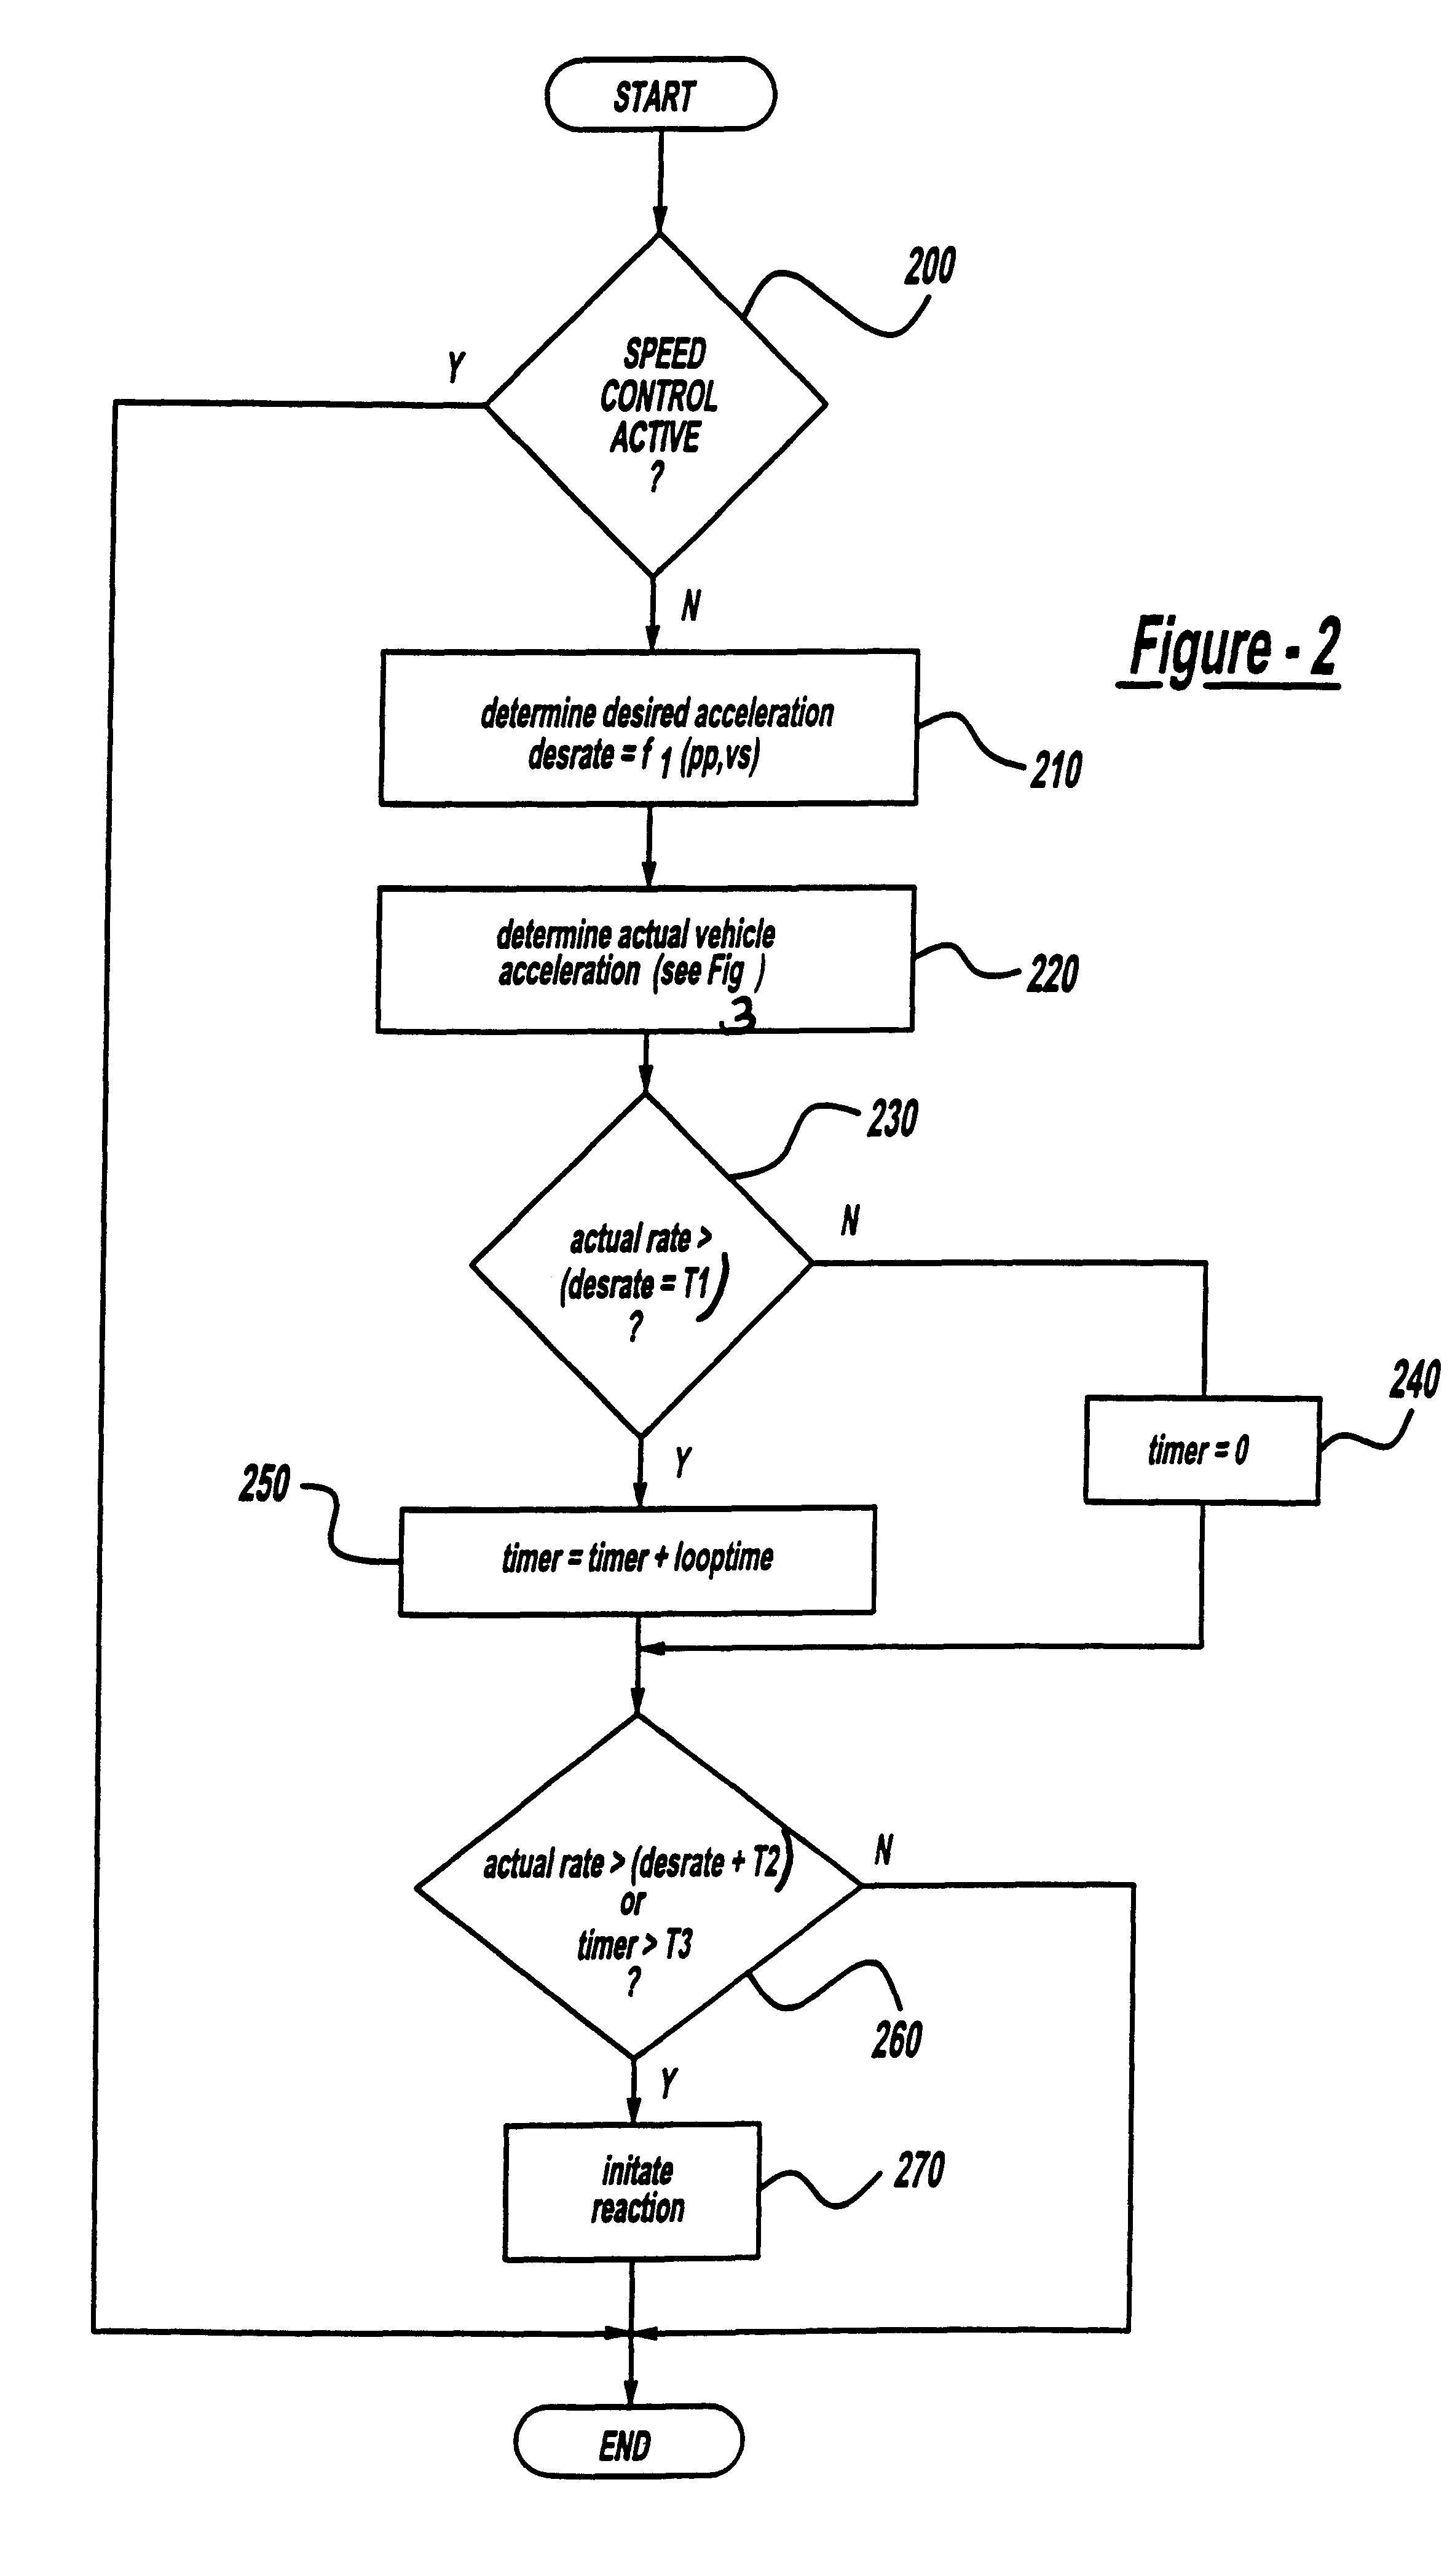 Engine control monitor for vehicle equipped with engine and transmission